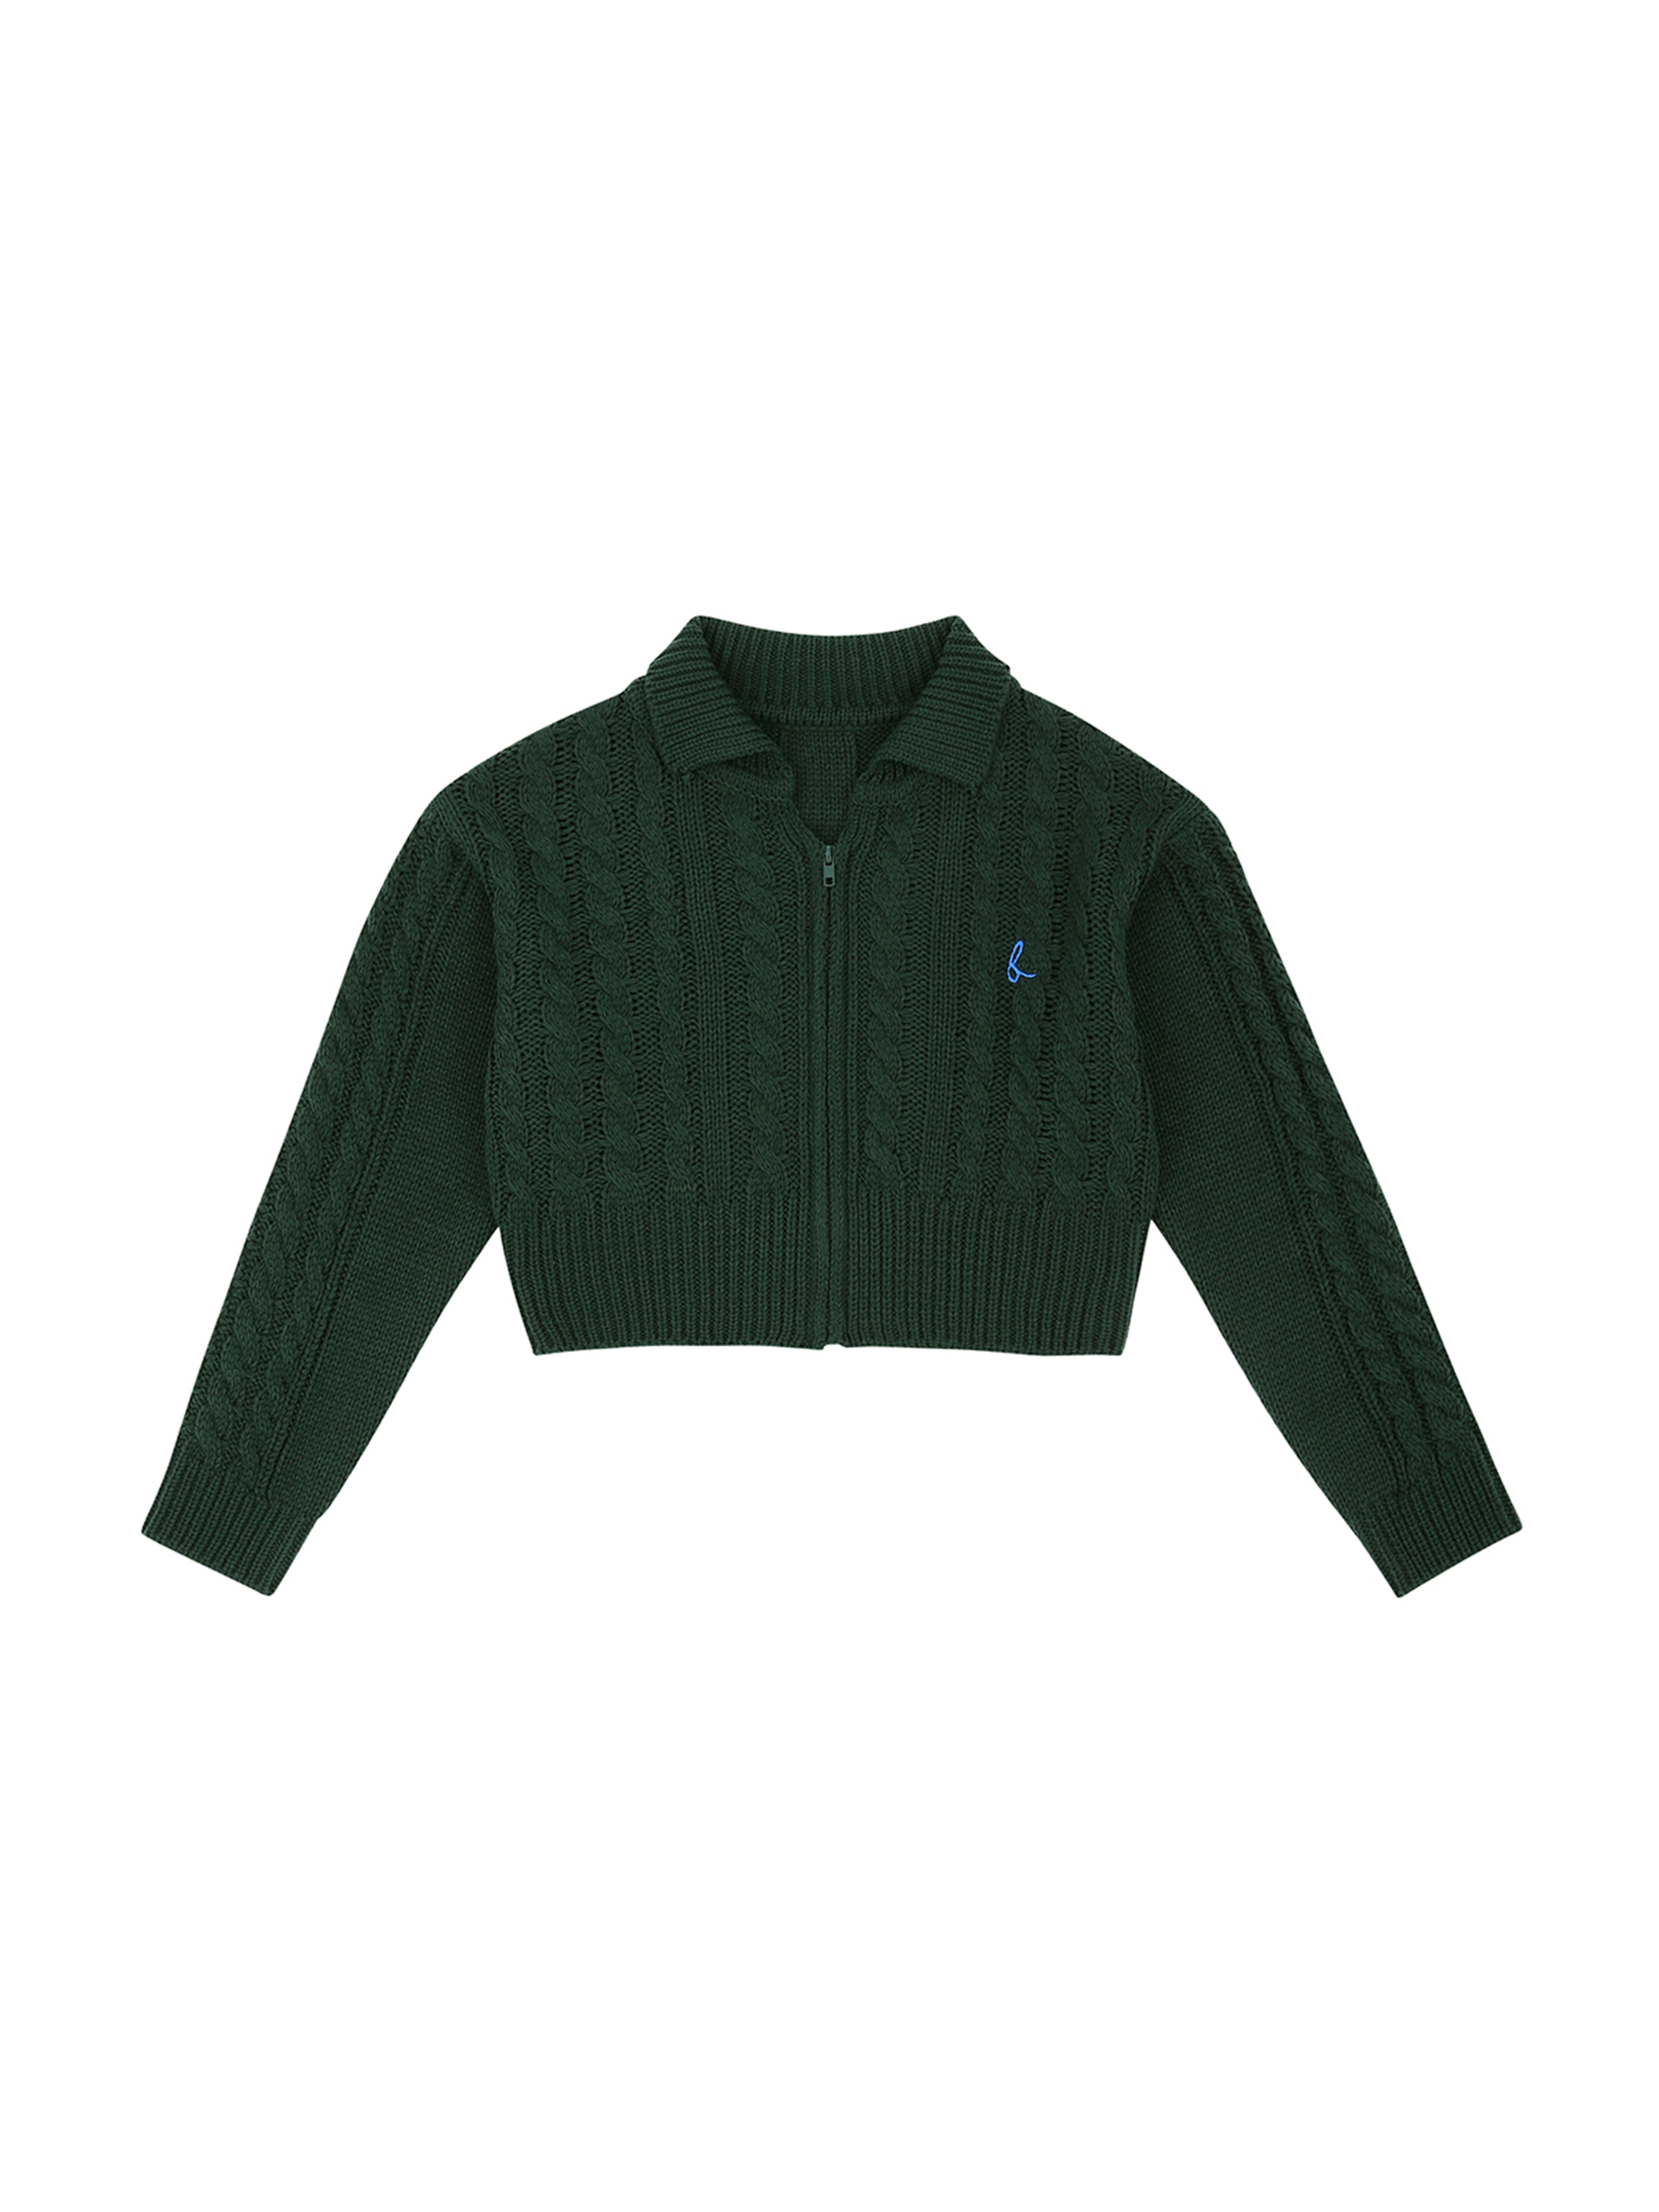 CROPPED CABLE KNIT ZIPUP JACKET (GREEN)